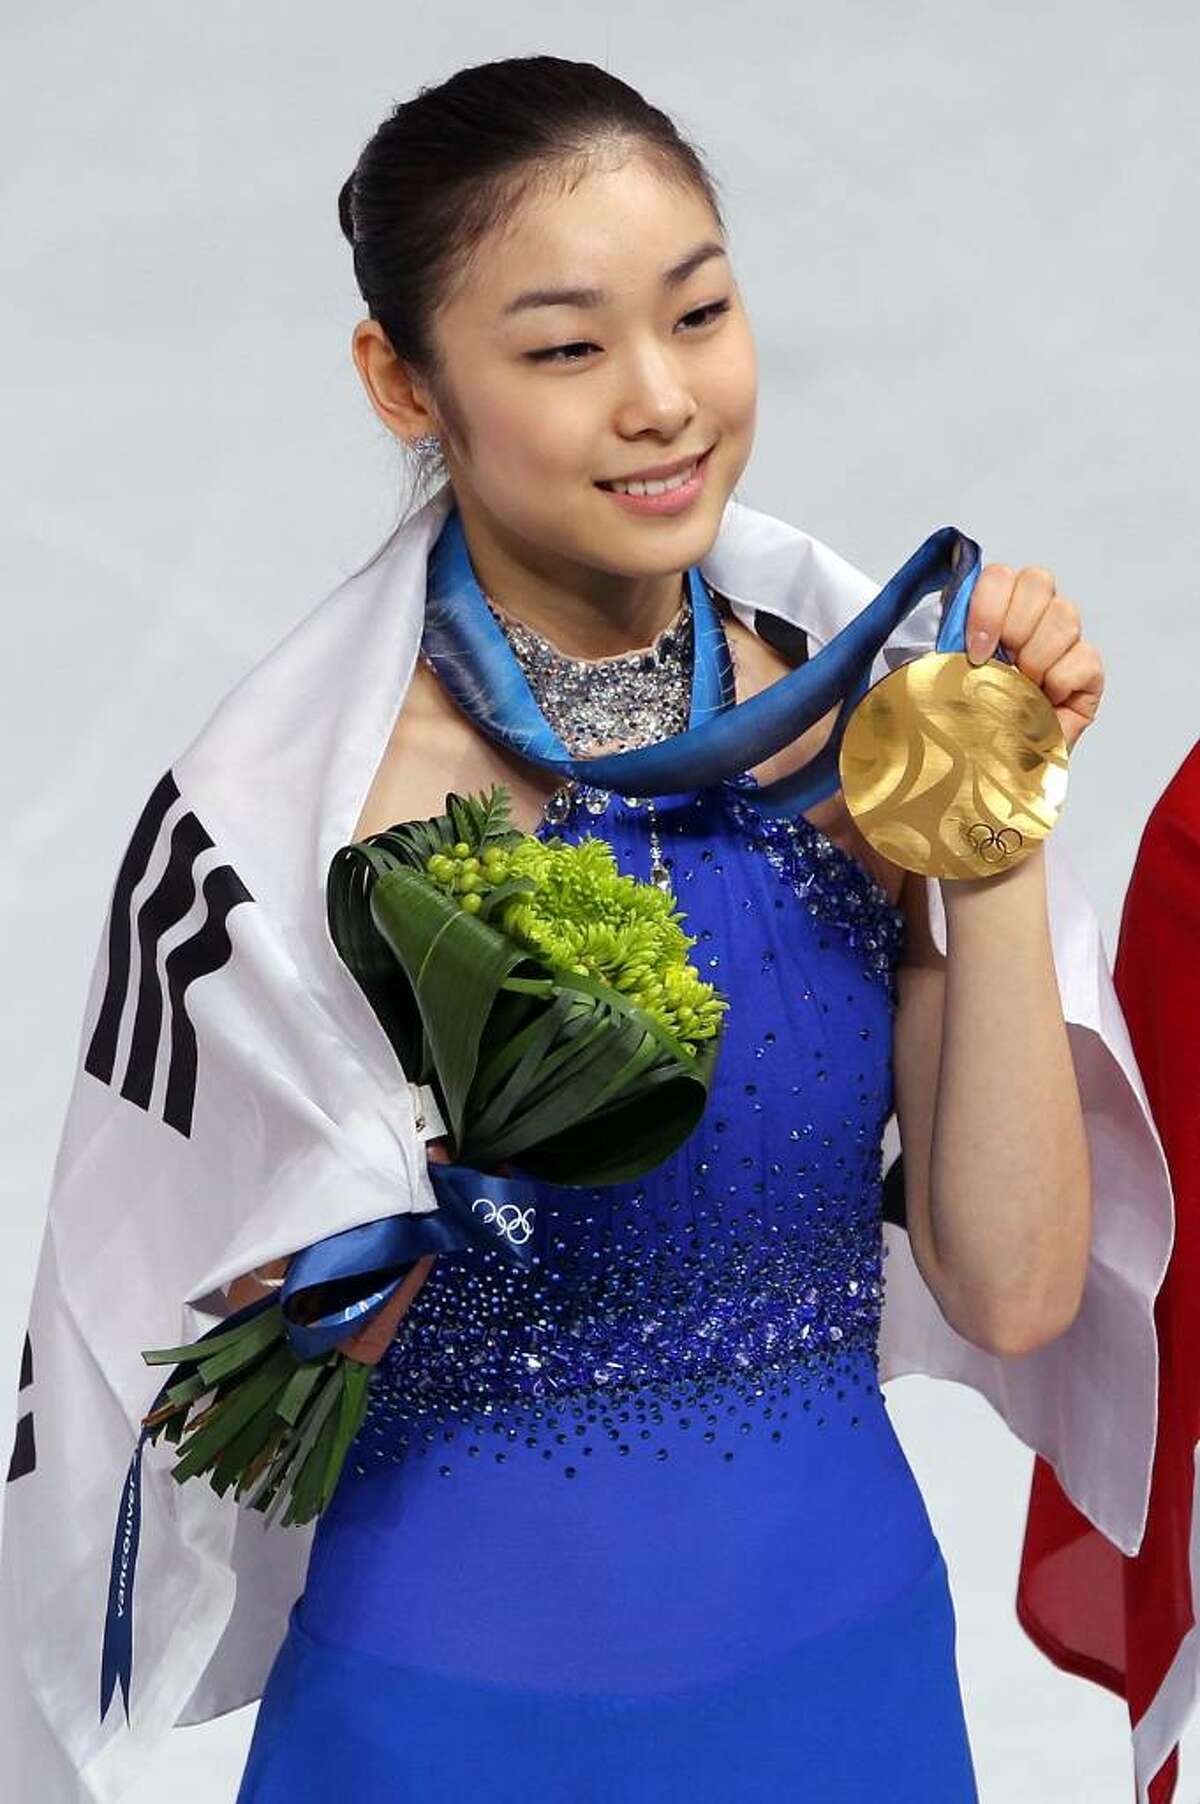 VANCOUVER, BC - FEBRUARY 25: Kim Yu-Na of South Korea celebrates winning the gold medal in the Ladies Free Skating during the medal ceremony on day 14 of the 2010 Vancouver Winter Olympics at Pacific Coliseum on February 25, 2010 in Vancouver, Canada. (Photo by Matthew Stockman/Getty Images) *** Local Caption *** Kim Yu-Na